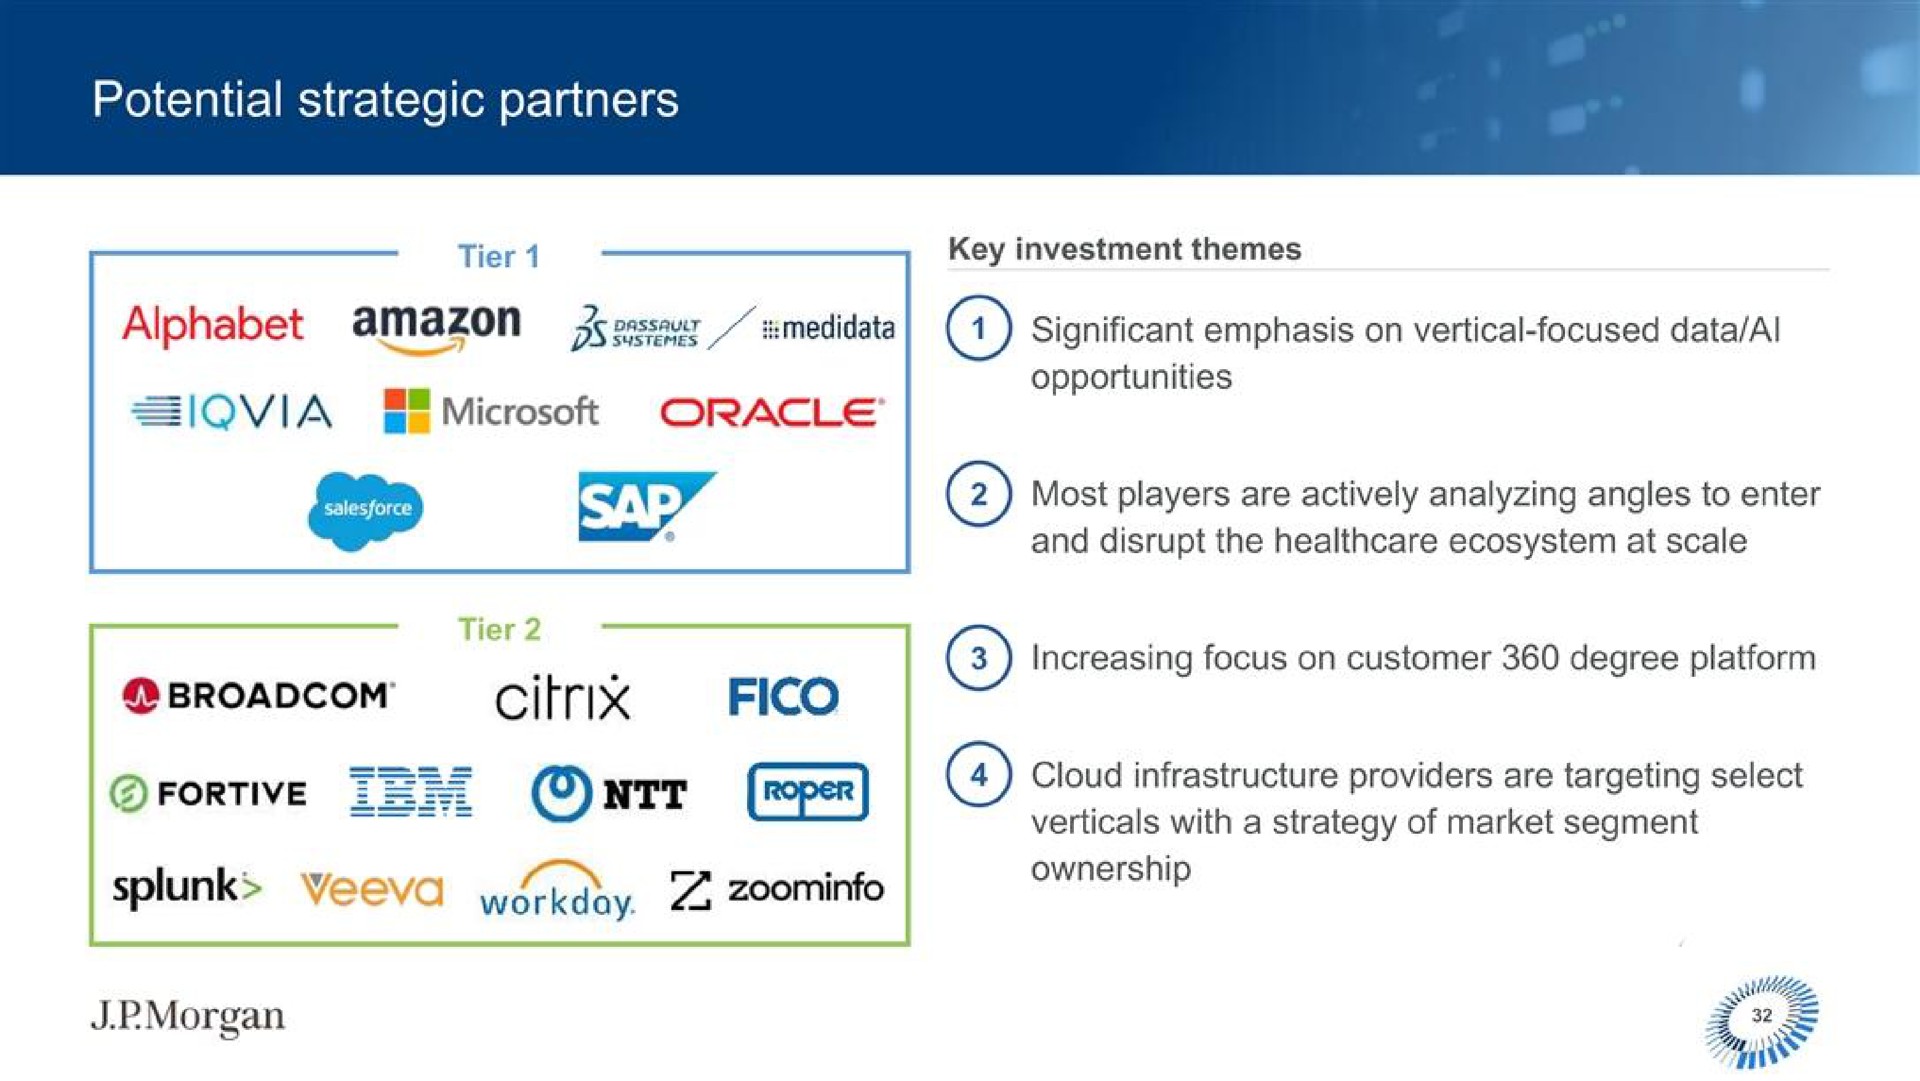 potential strategic partners alphabet passer significant emphasis on vertical focused data a oracle most players are actively analyzing angles to enter fico morgan we on ownership | J.P.Morgan